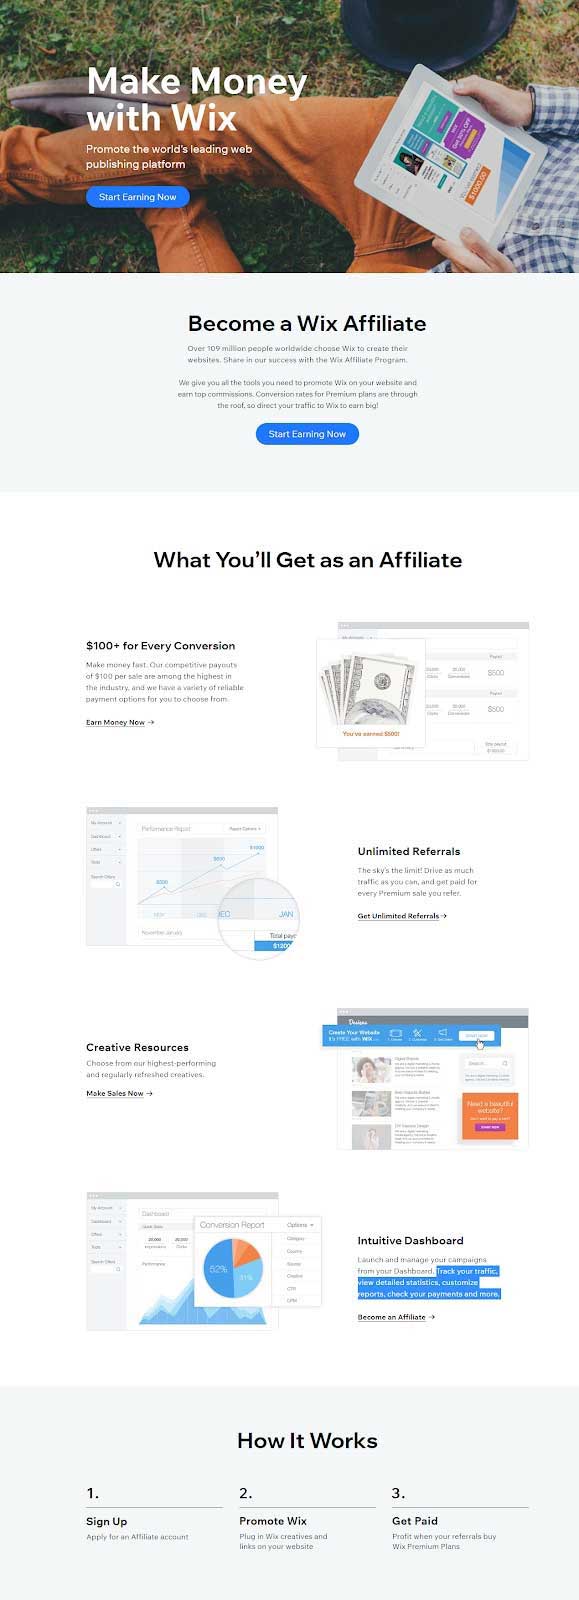 15 Affiliate Marketing Examples For Businesses to Draw Inspiration From 5